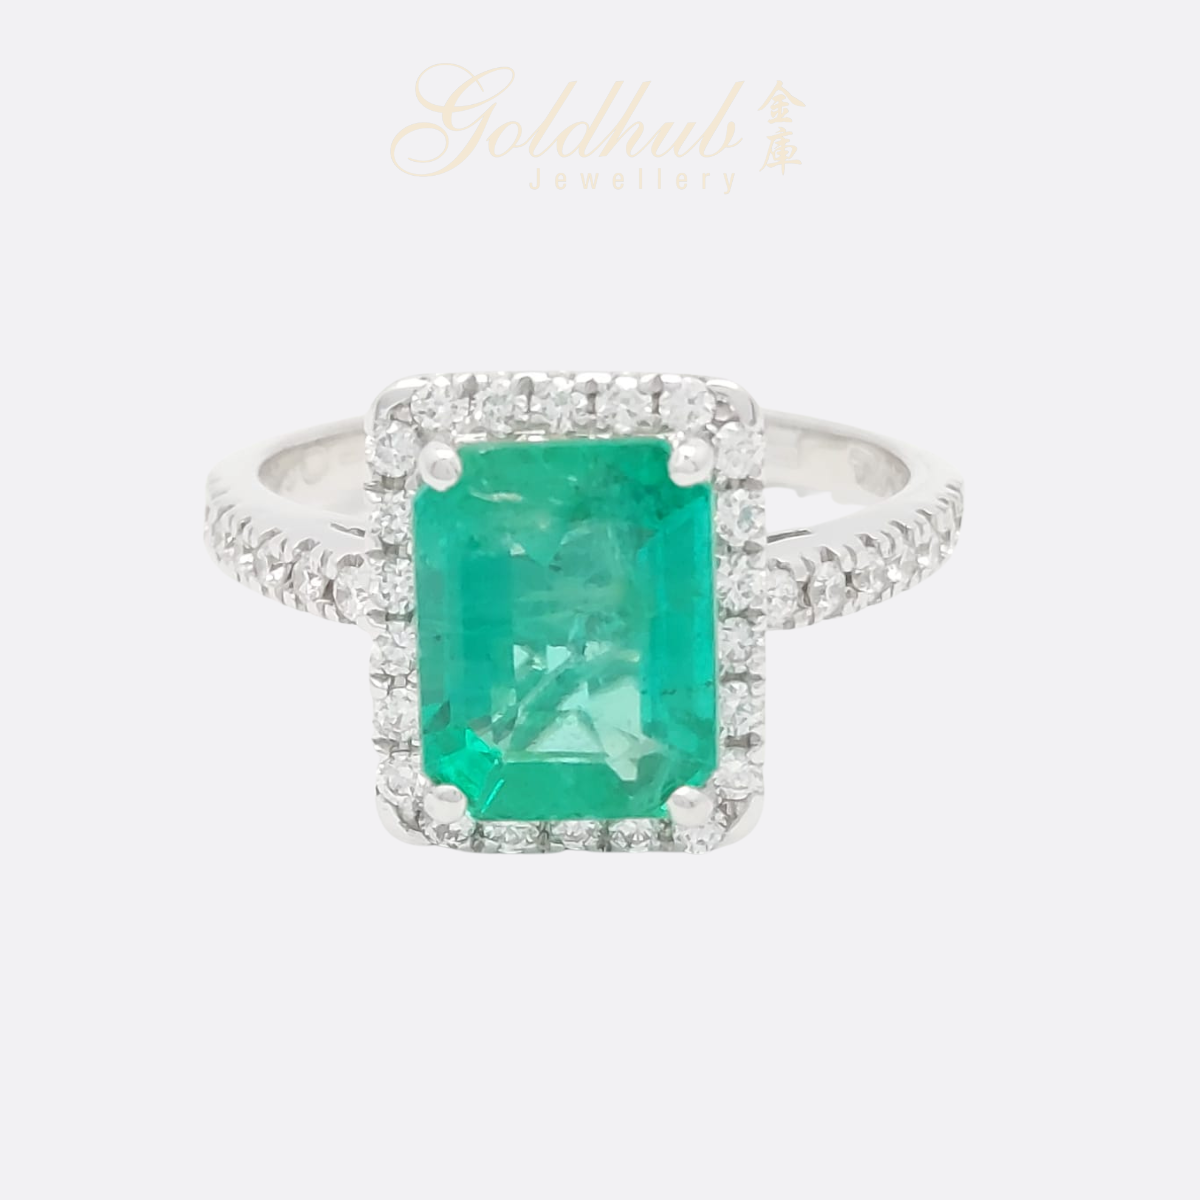 FURTHER DISCOUNTED] 18K Emerald Diamond Ring in White Gold